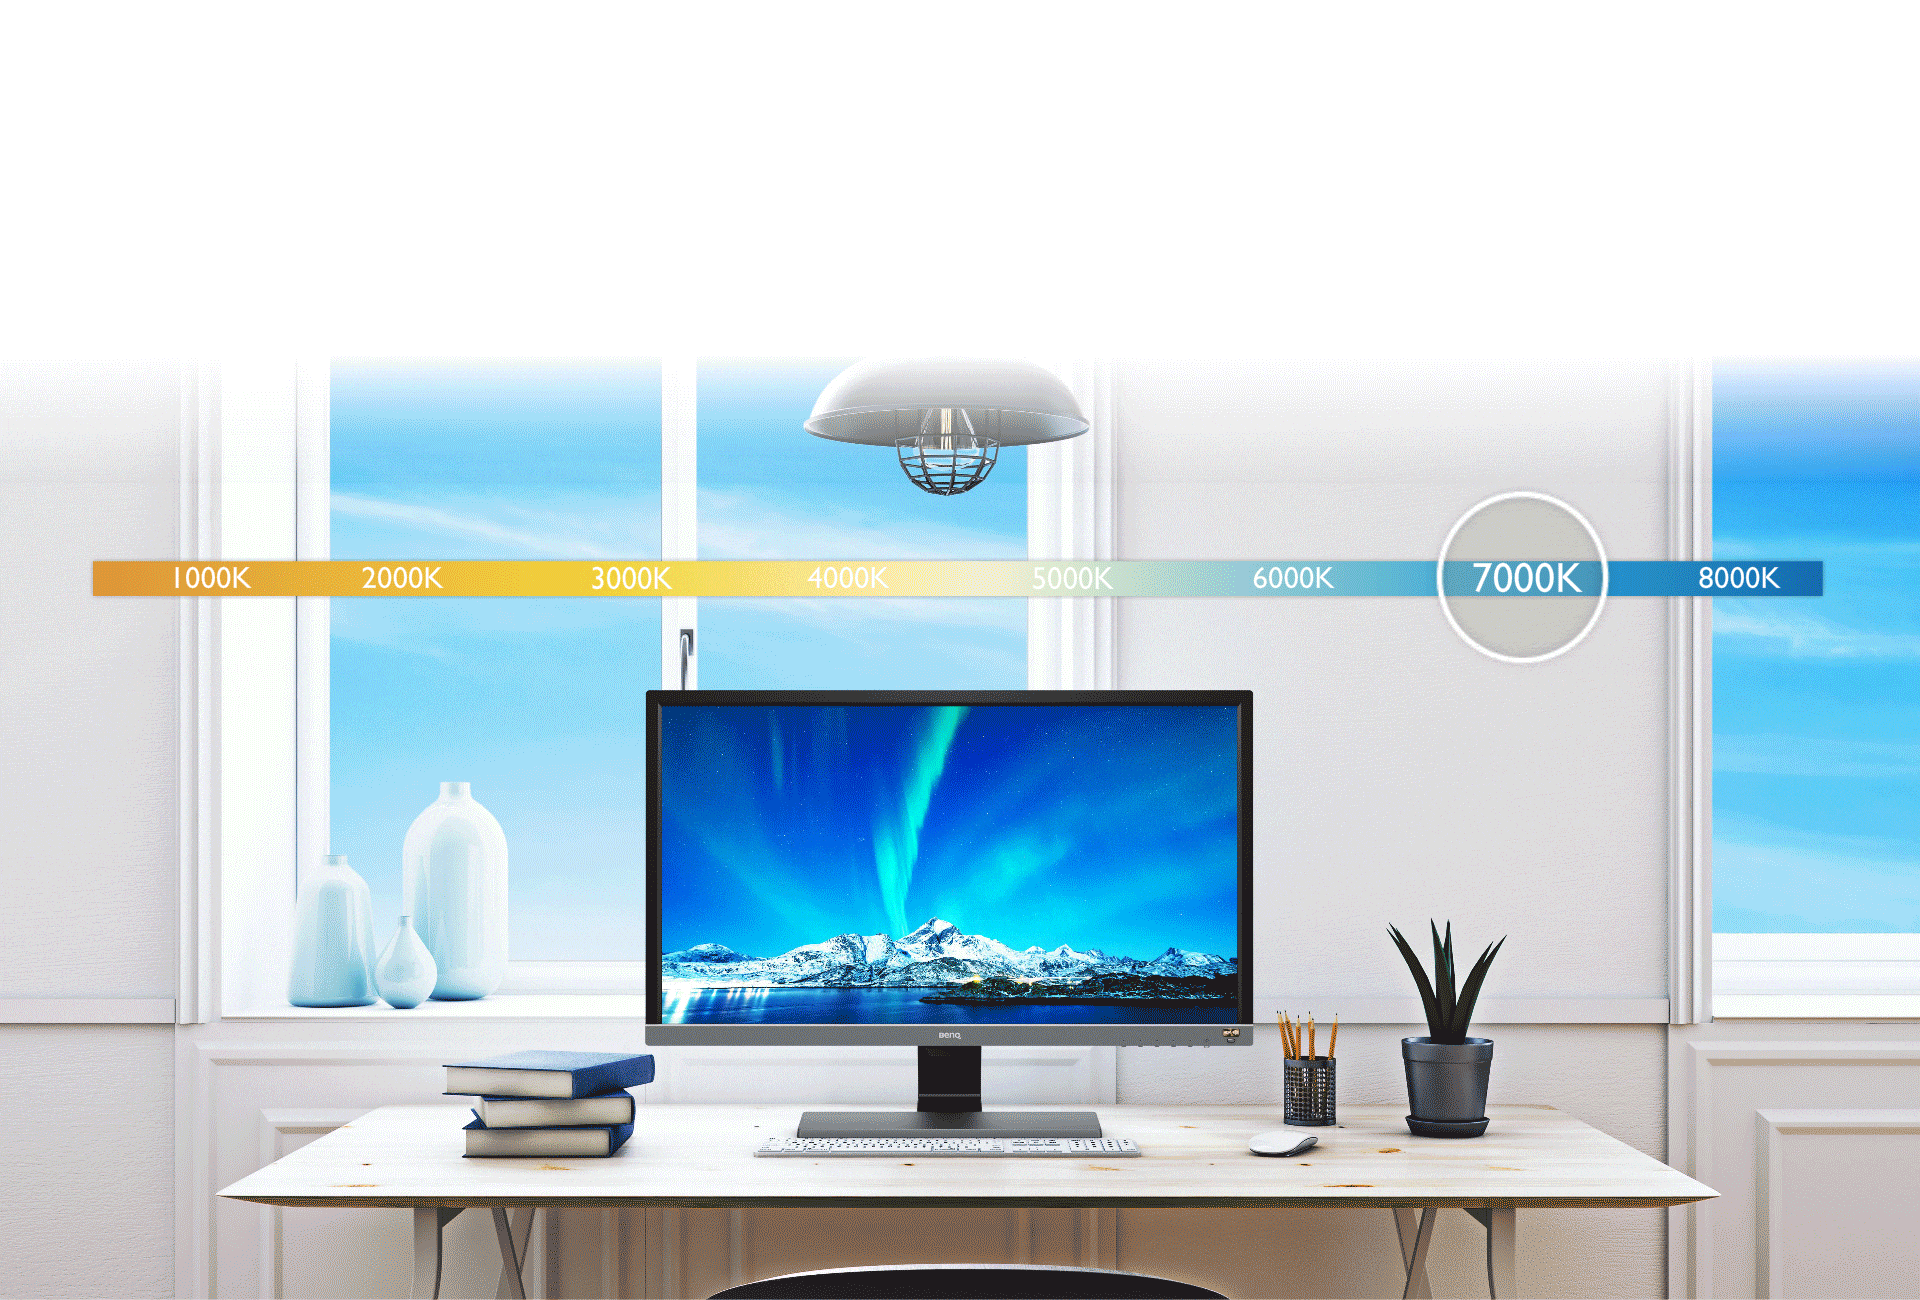 B.I. plus tech. is to brilliantly detect the ambient light levels and the color temperature in your viewing environment to automatically adjust on-screen brightness and color temperature for viewing comfort